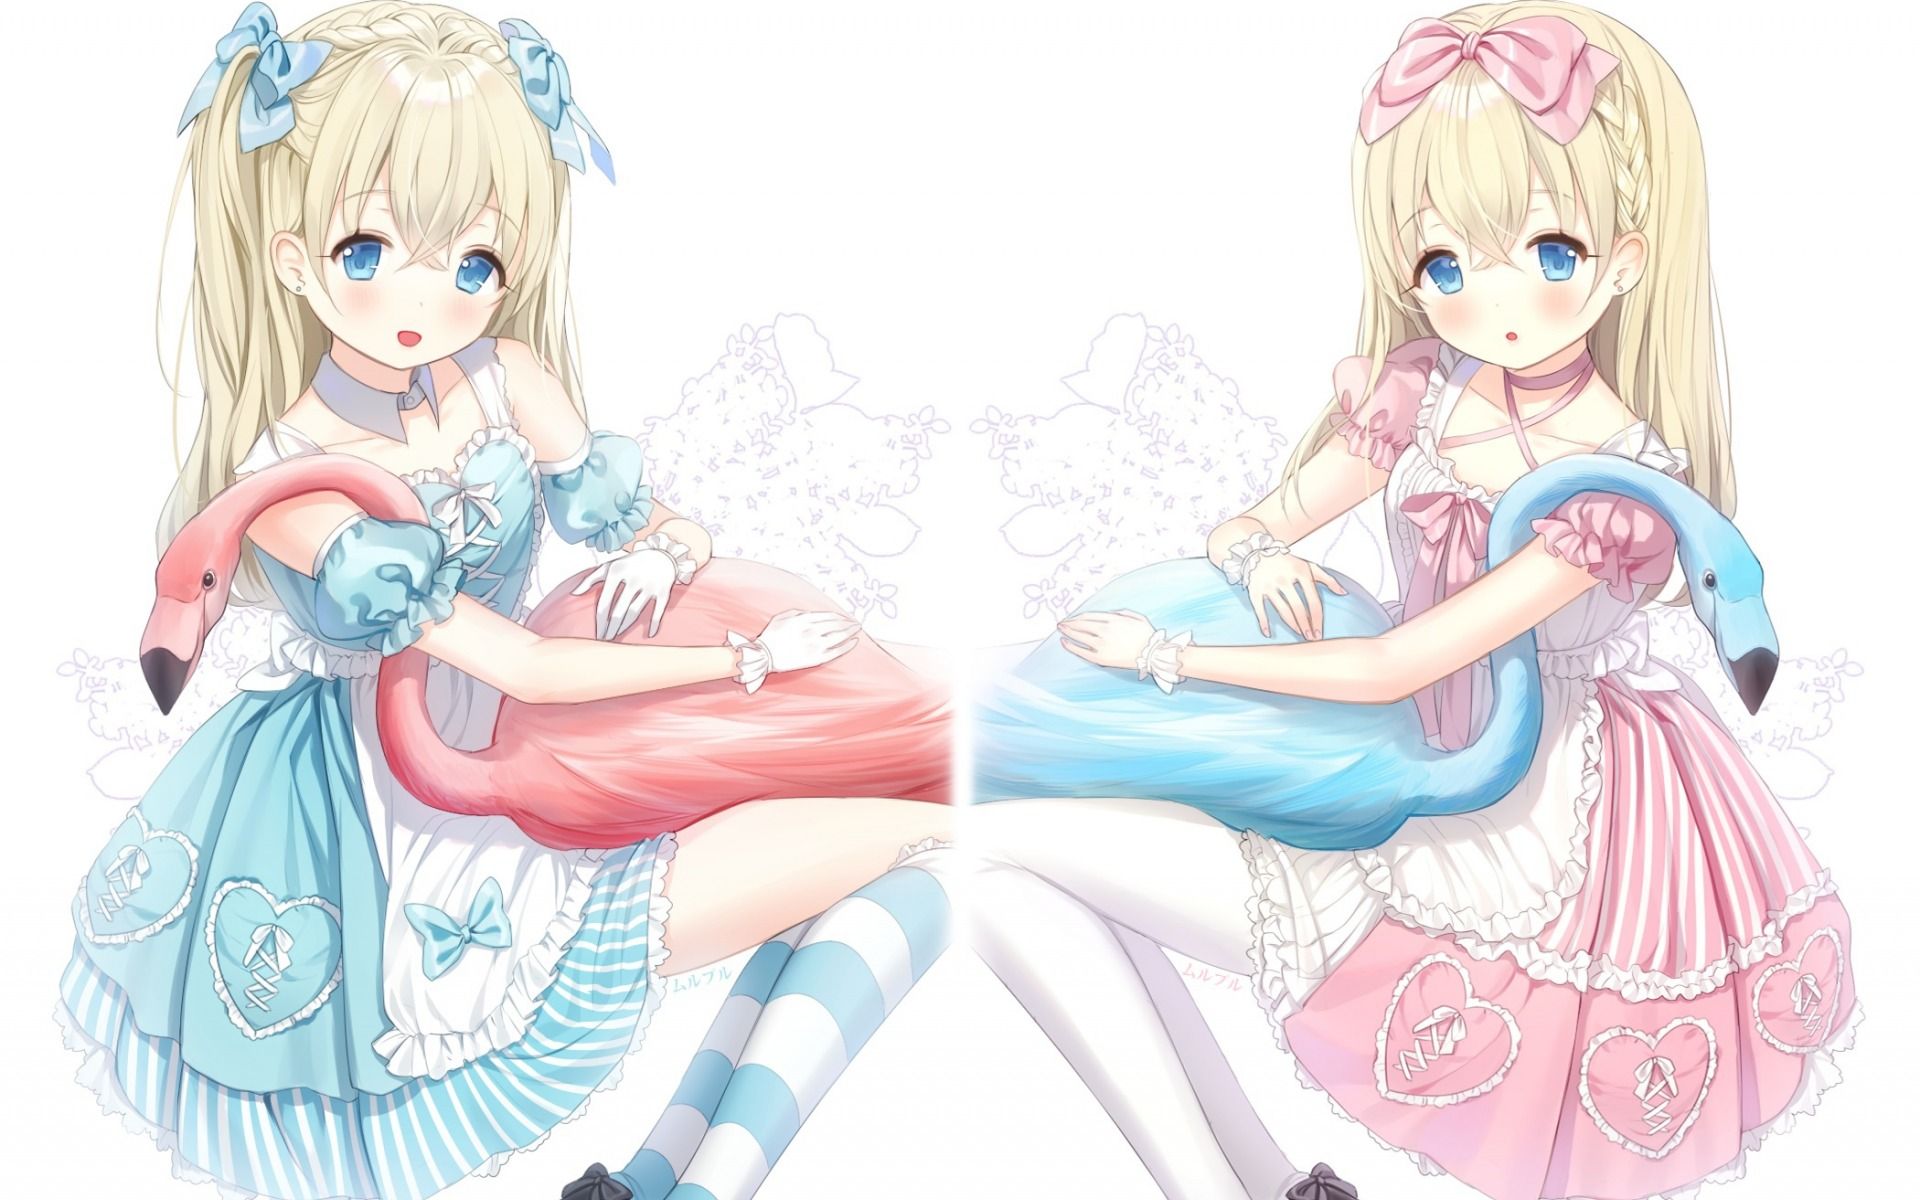 Download wallpaper Alice in Wonderland, Japanese anime, manga, twins, blue flamingos, pink flamingos for desktop with resolution 1920x1200. High Quality HD picture wallpaper